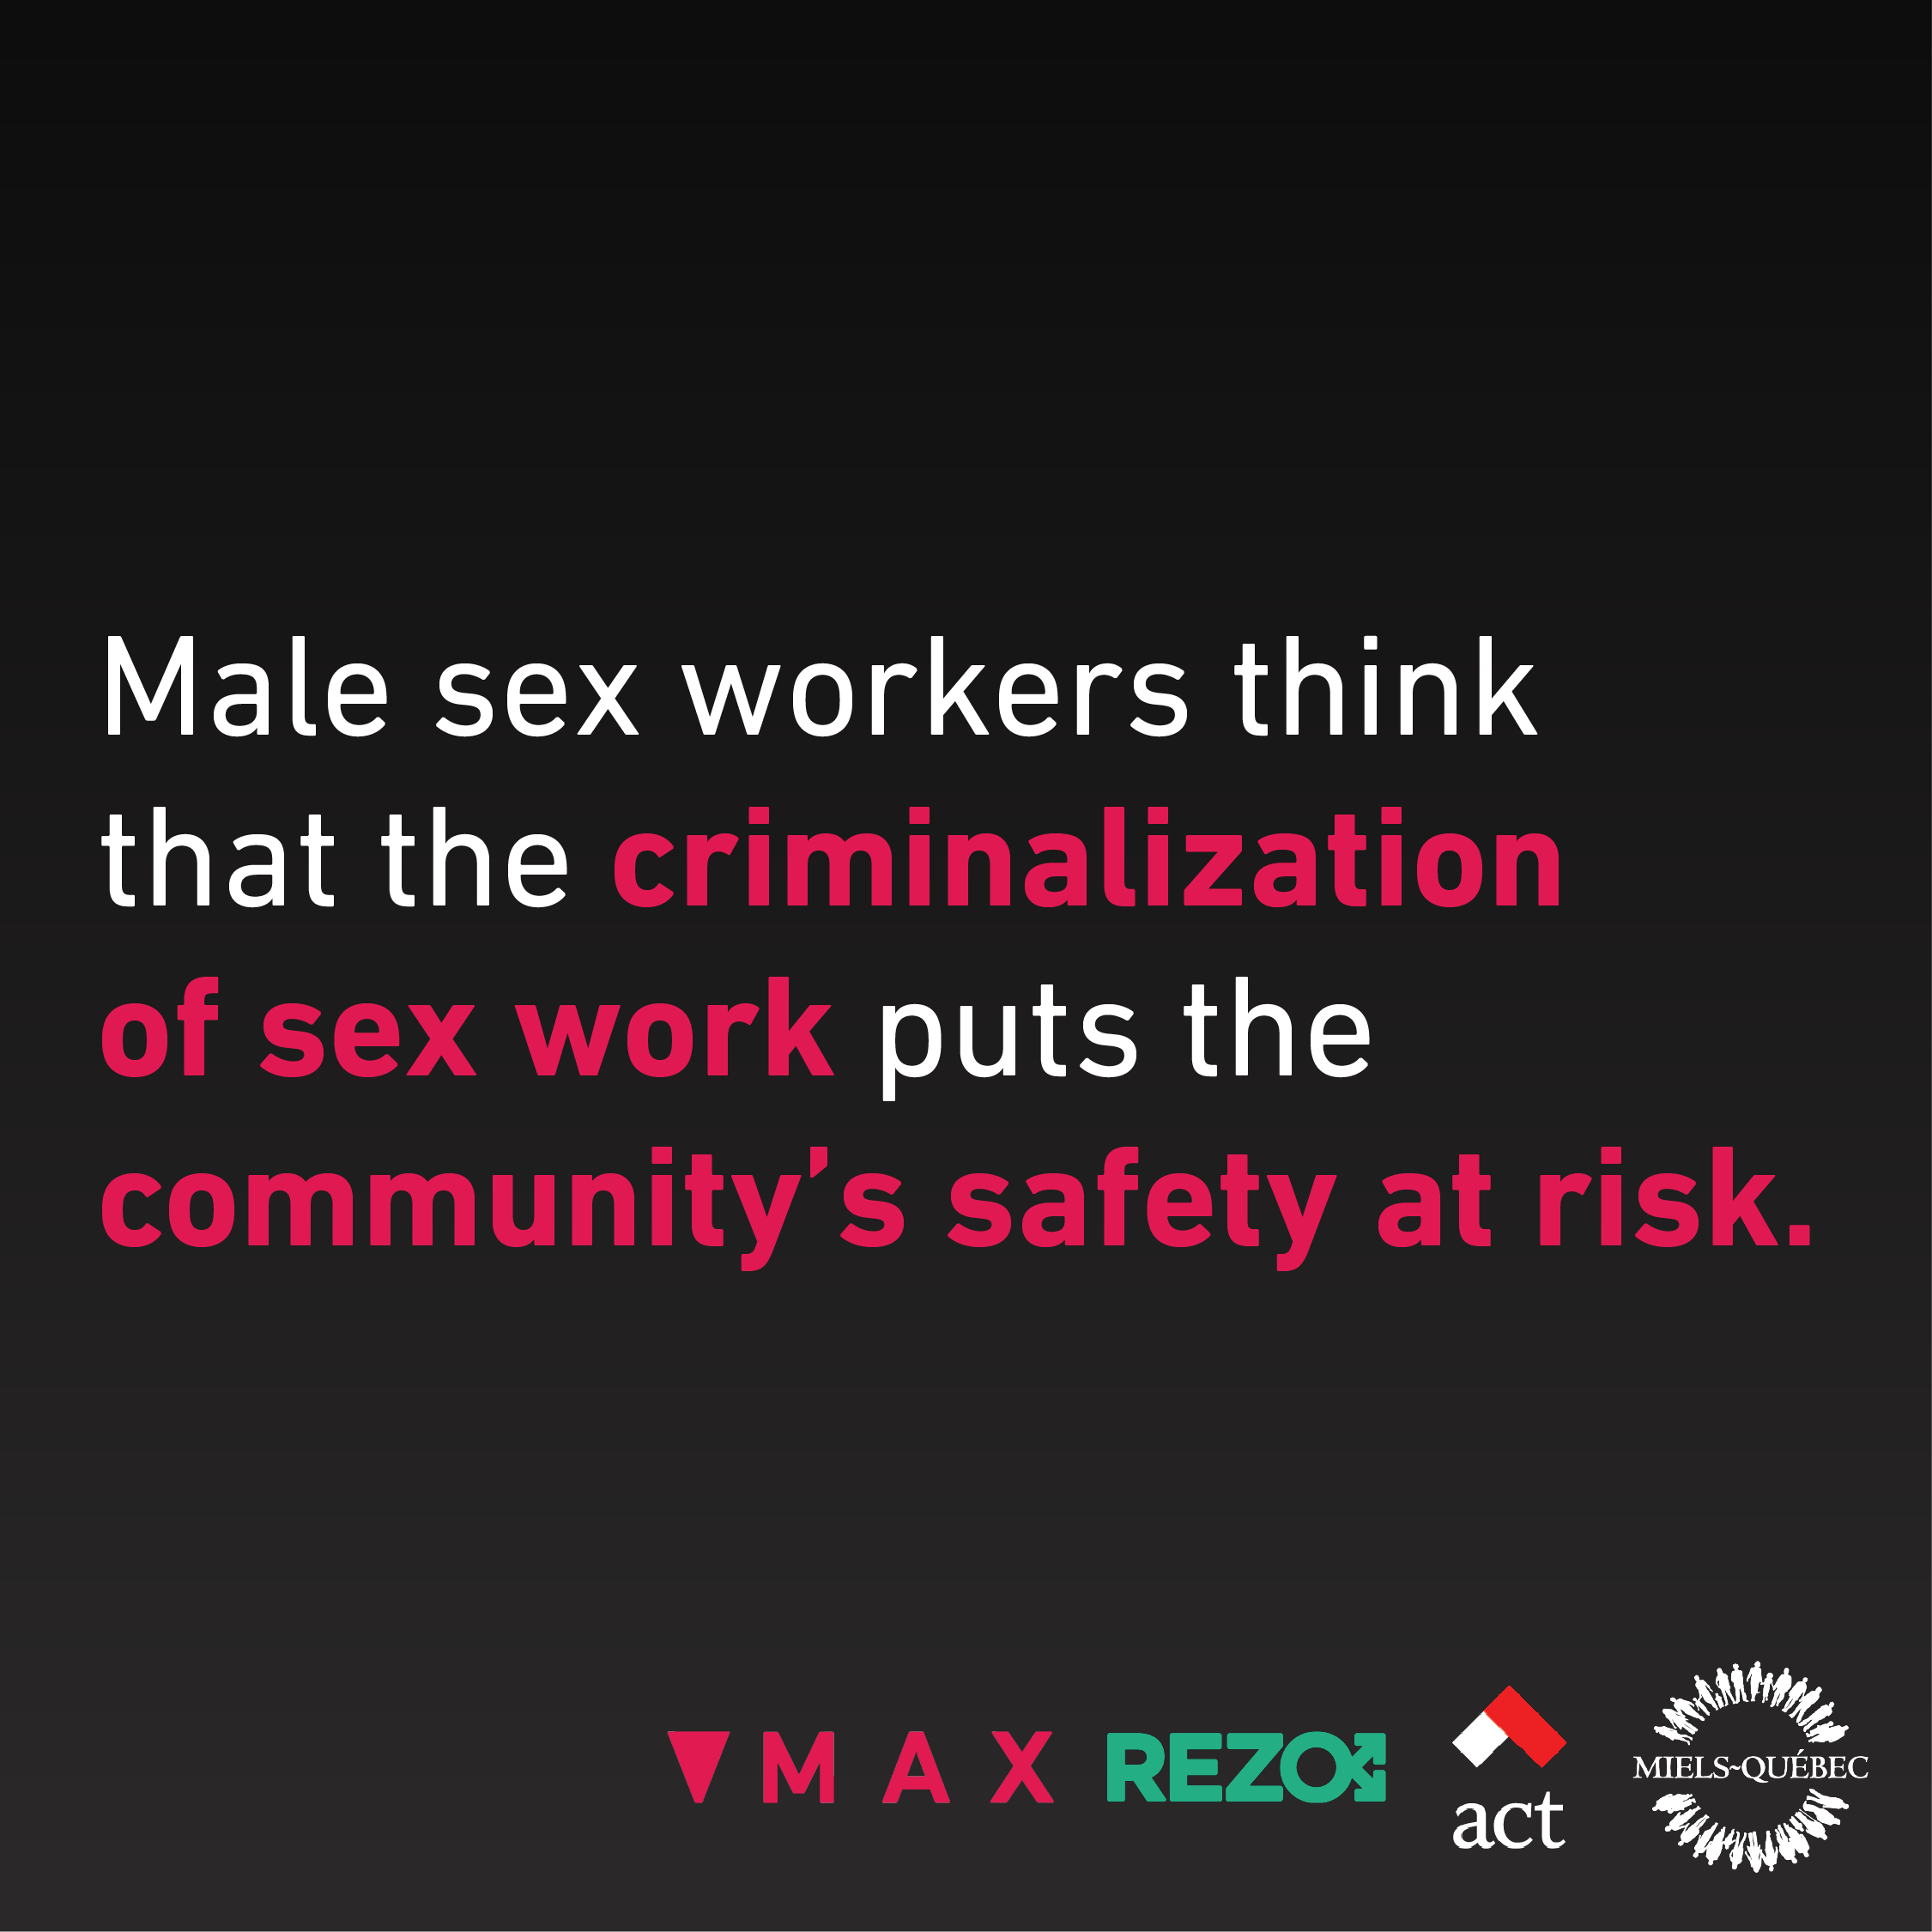 Male sex workers think that the criminalization of sex work puts the community’s safety at risk.